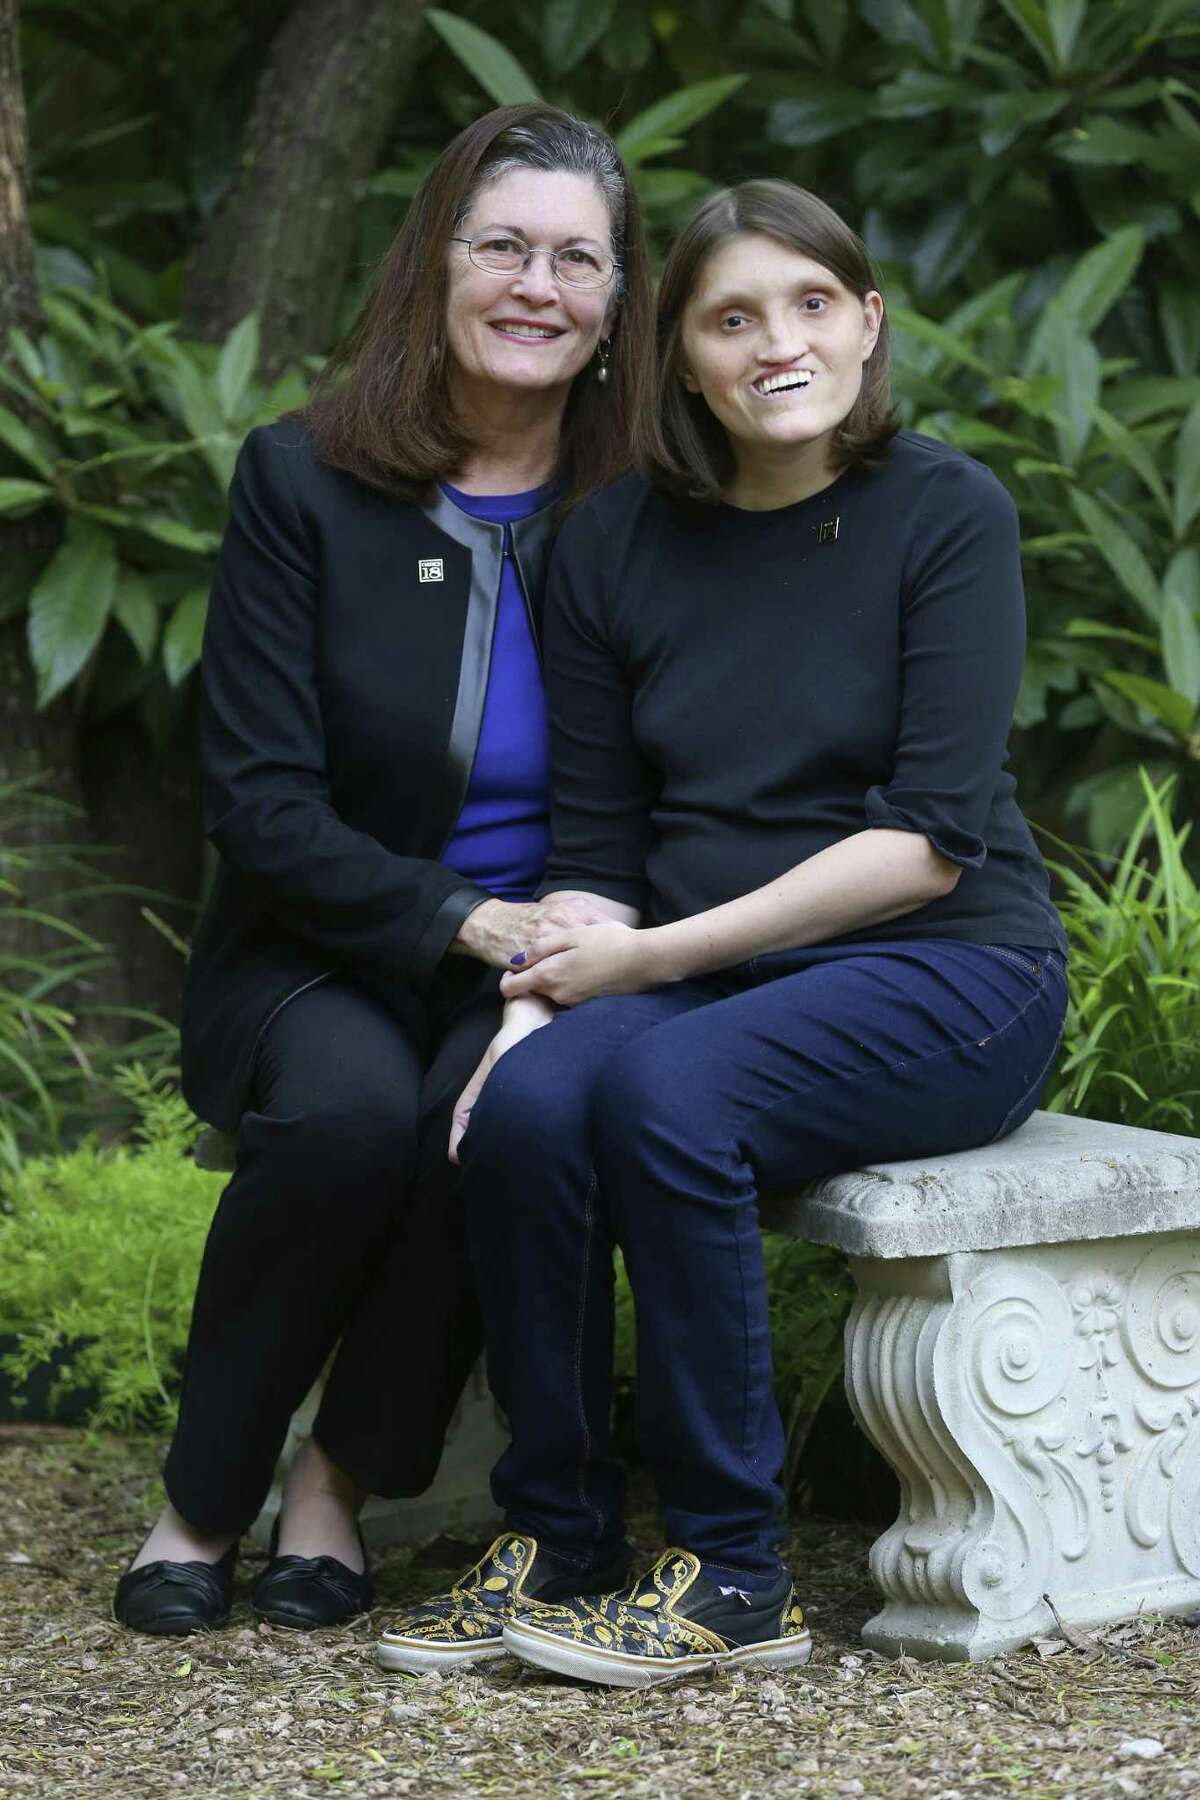 Jannine Cody, left, sits with her daughter, Elizabeth, on Nov. 6, 2018, outside their home, which is the also the office for the Chromosome 18 Registry and Research Society. Cody founded the organization, which works on behalf of people born with chromosome 18 abnormalities, after her daughter was born with the genetic condition.